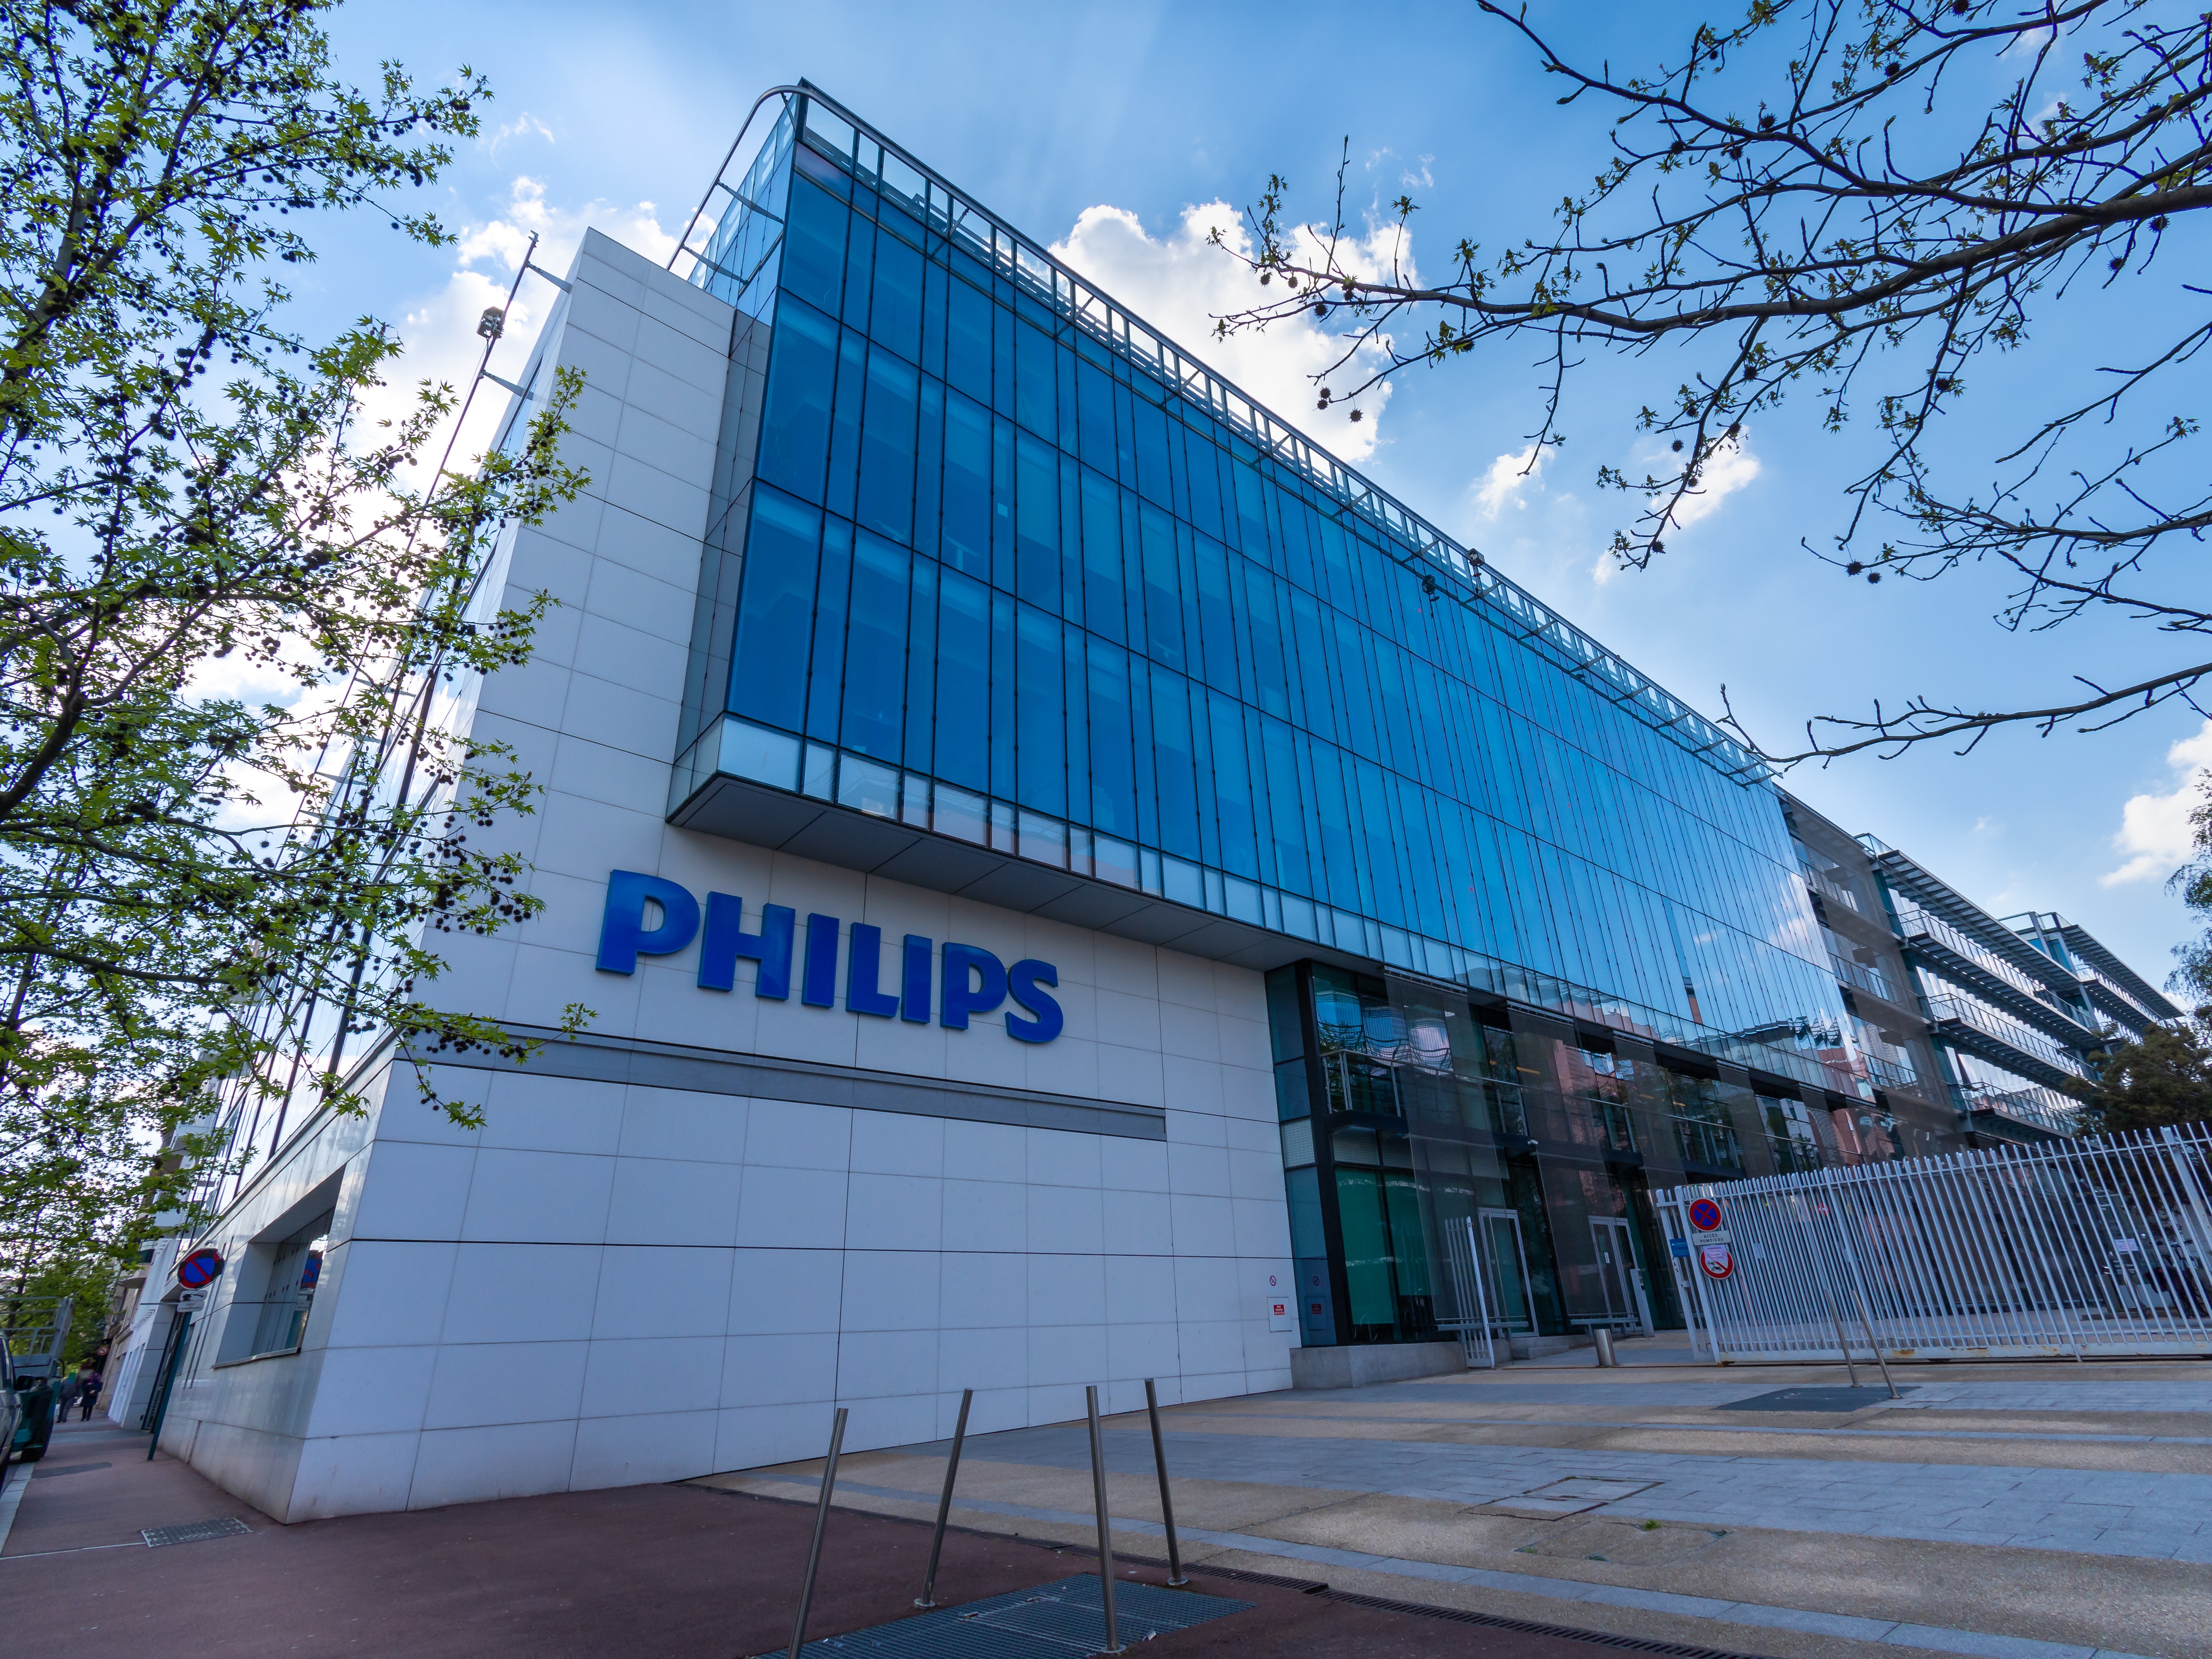 Philips CEO starts by slashing 4,000 jobs to save costs amid